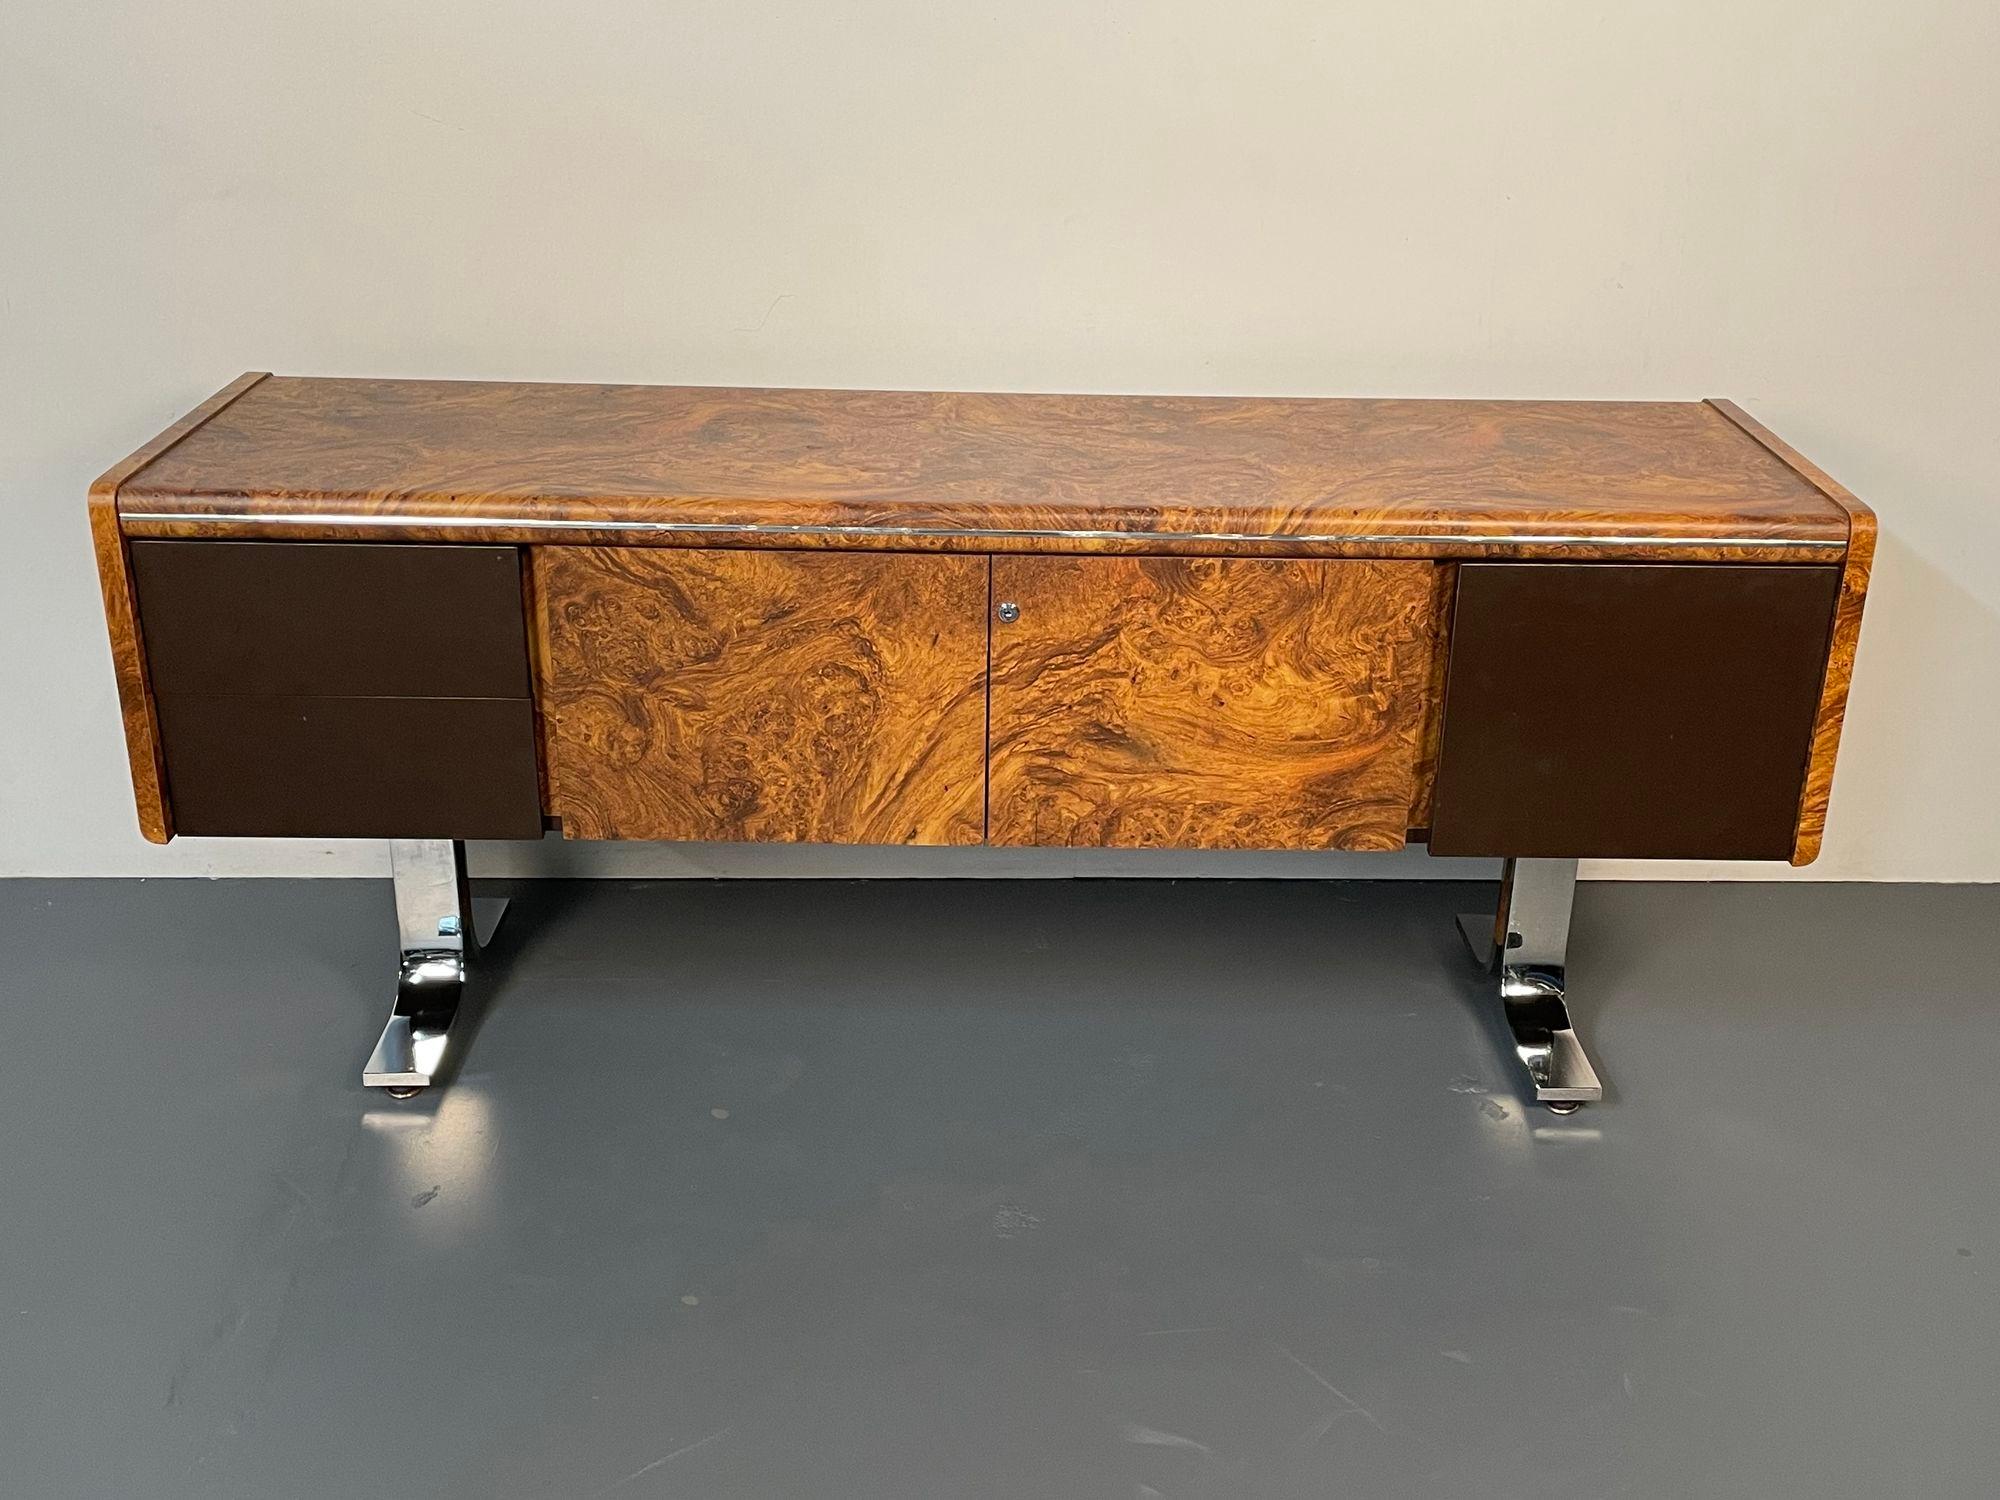 Leif Jacobsen Style, Mid-Century Modern, Credenza, Burlwood, Canada, 1950s For Sale 1